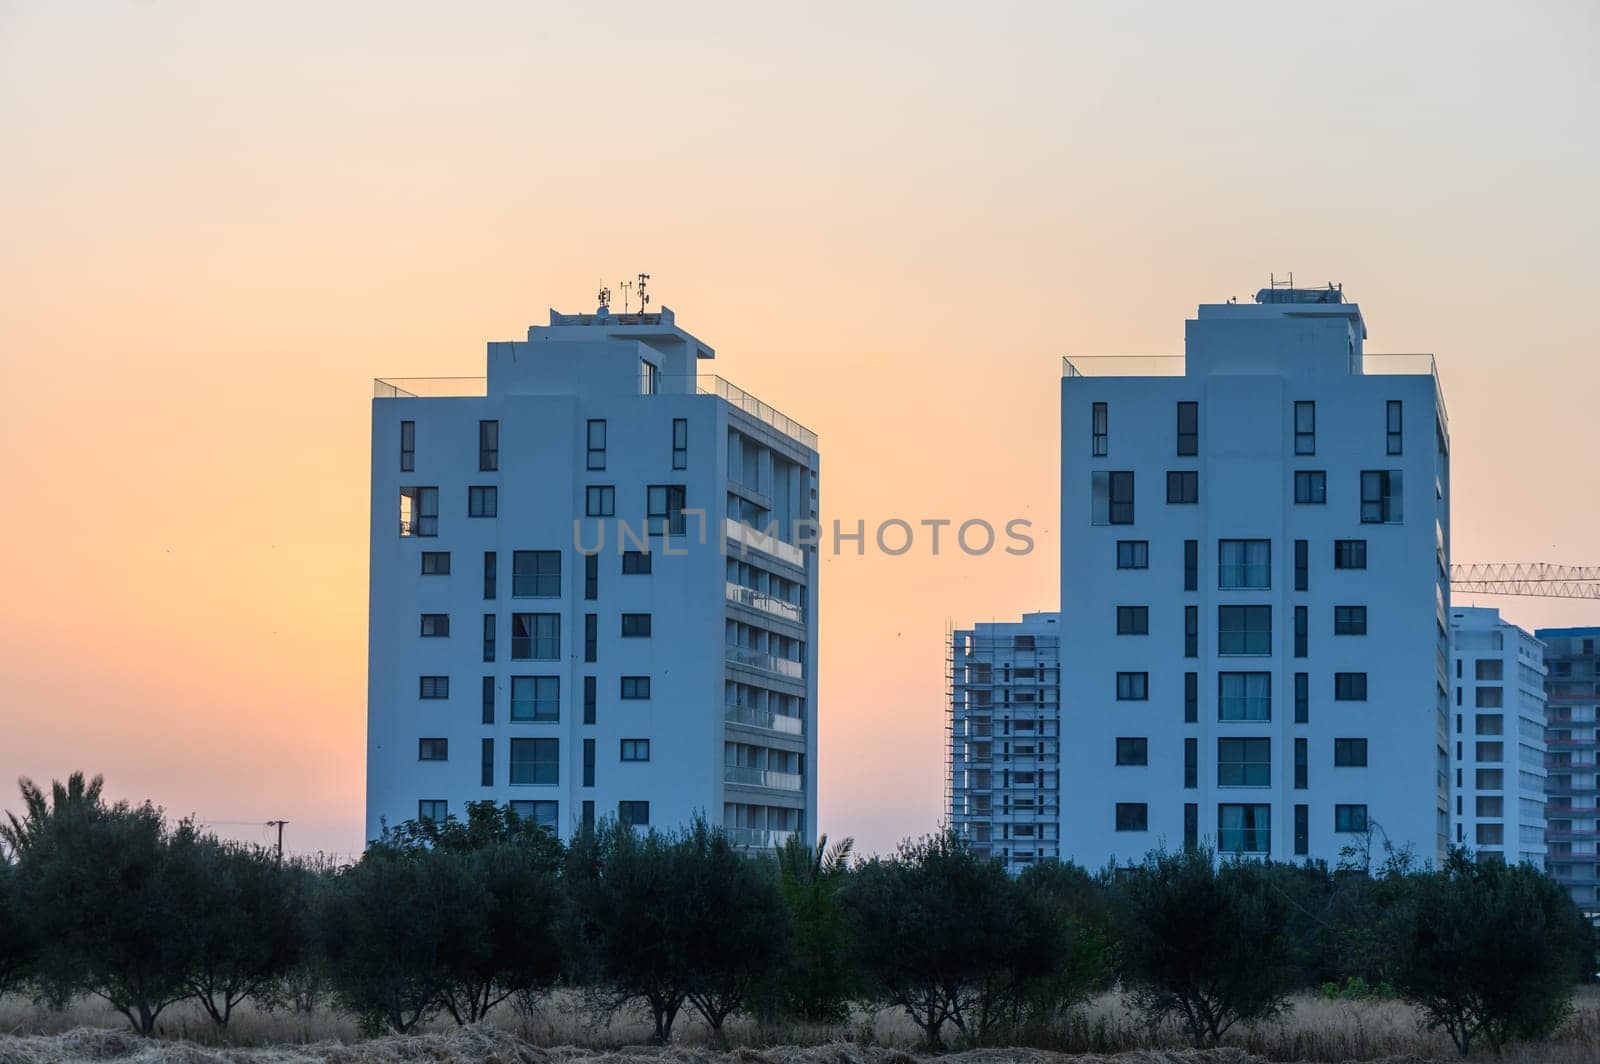 residential complex in Cyprus in the sunset by Mixa74